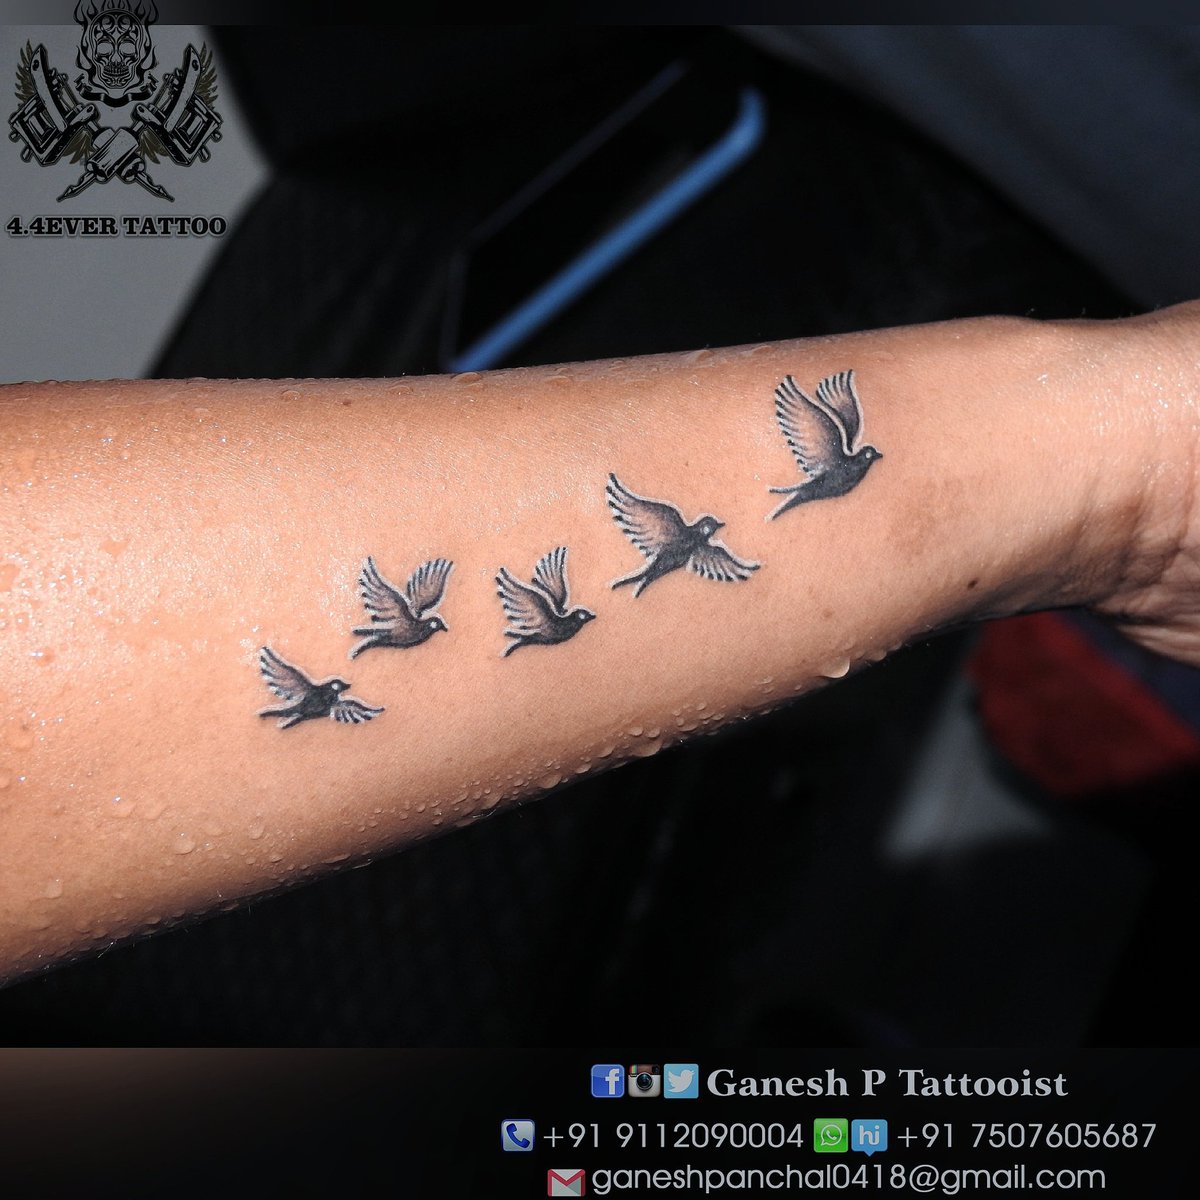 Share 95 about free bird tattoo on hand super cool  indaotaonec